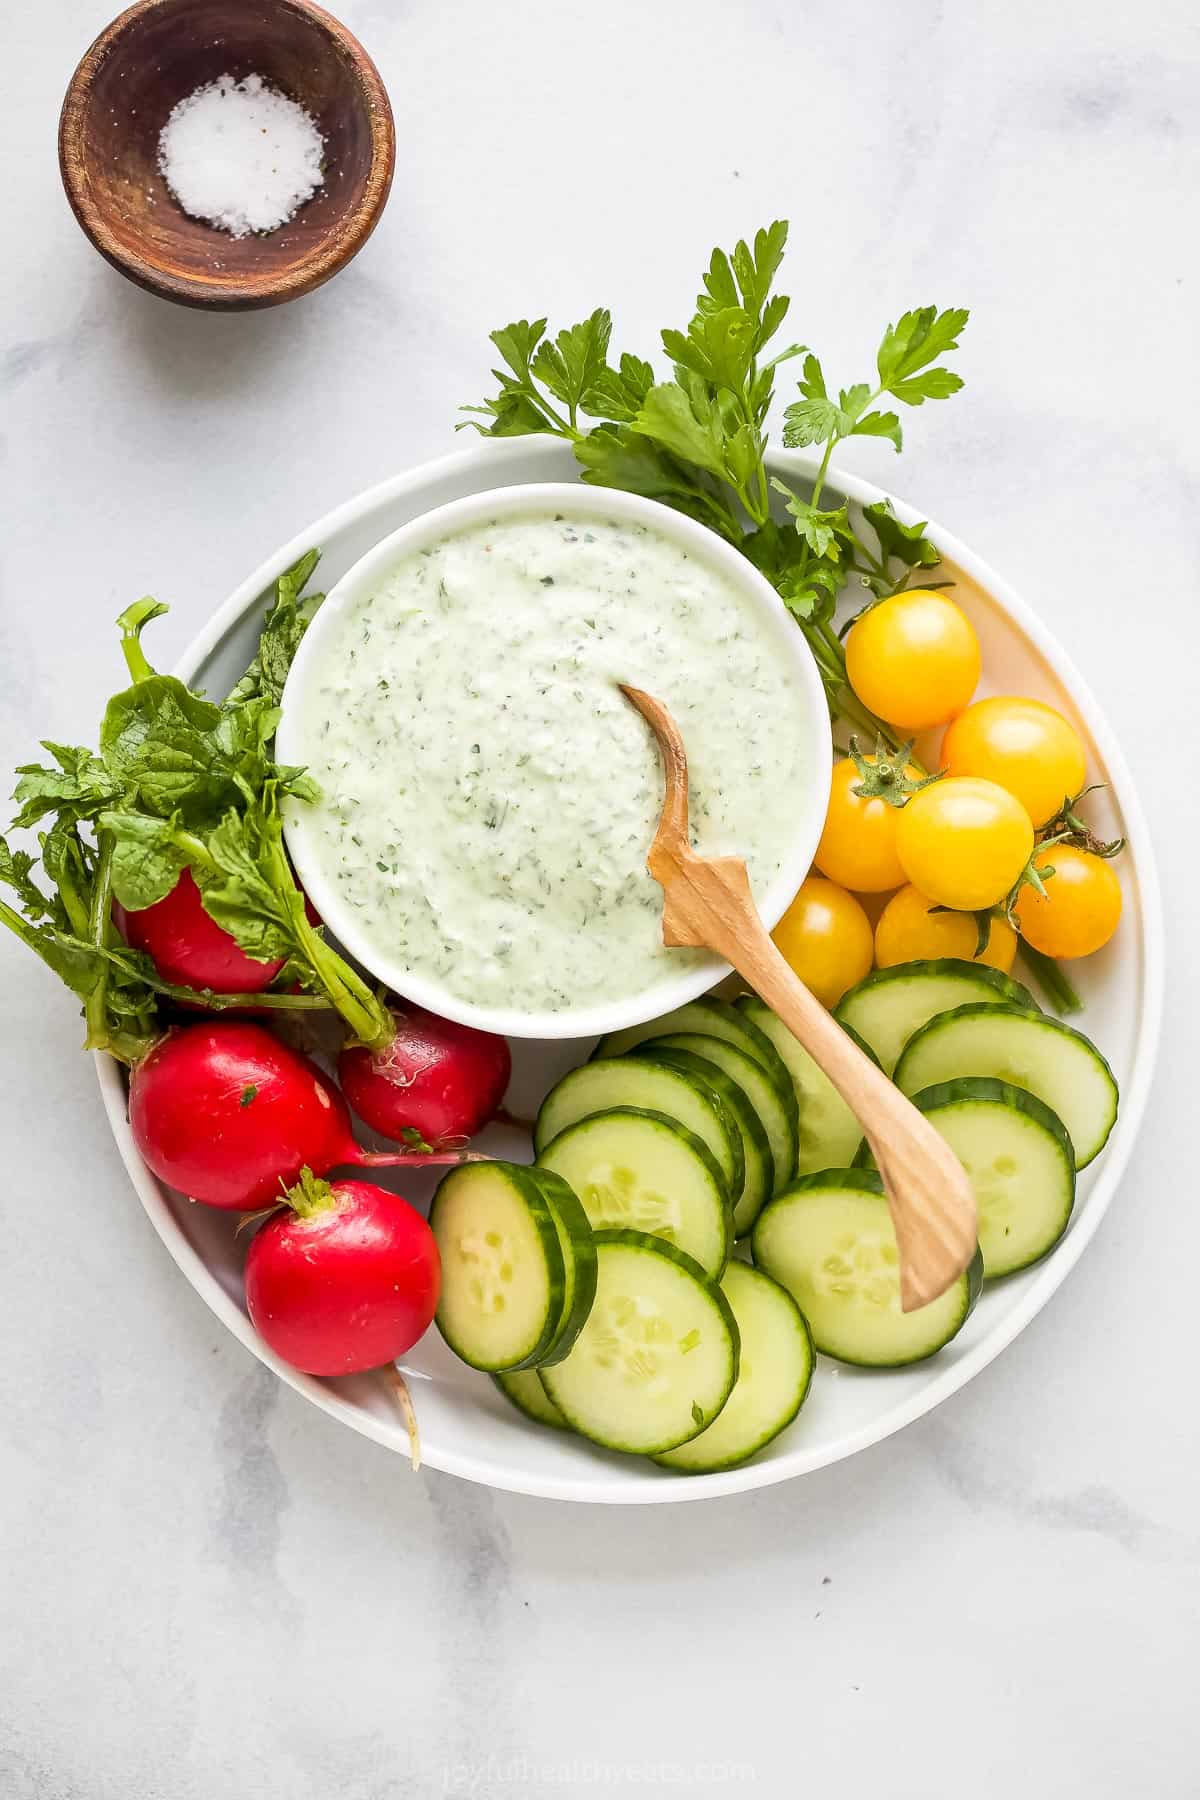 Crudités on a plate with green goddess dip and a small dish of salt beside the plate